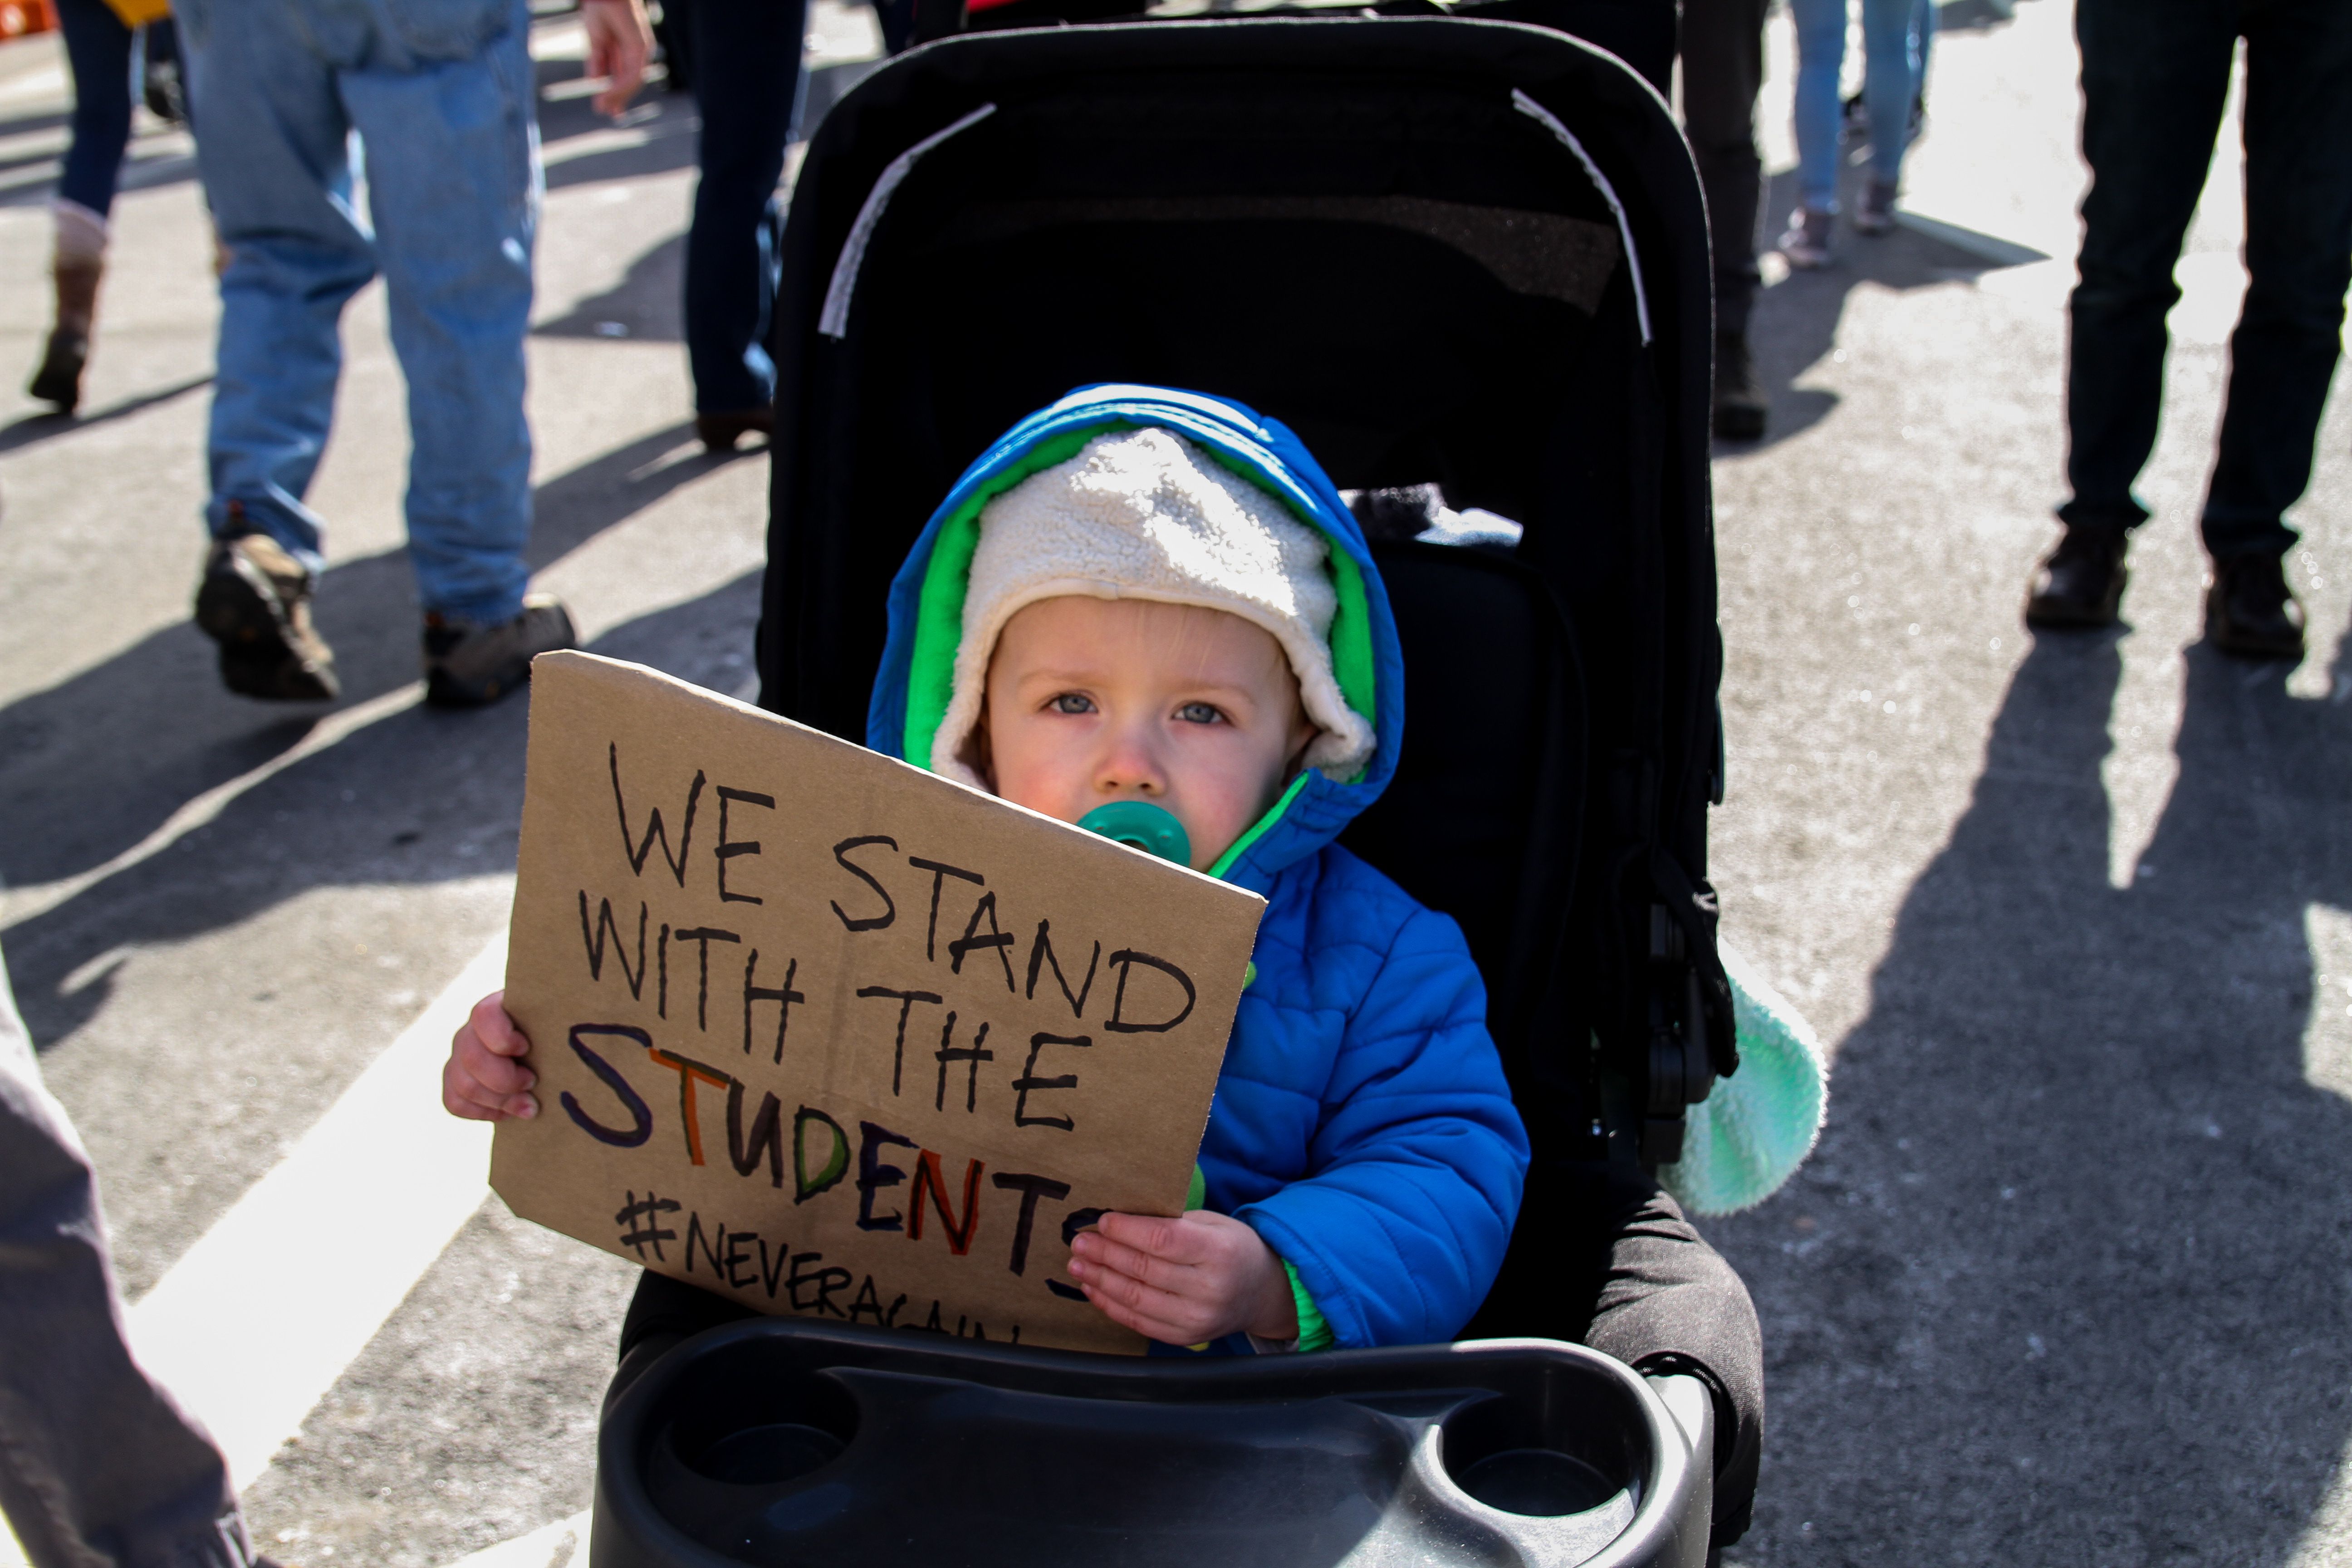 Children of all ages showed up to march, or in some cases ride, down Pennsylvania Avenue during March For Our Lives. Image by Alyssa Sperrazza. United States, 2018.